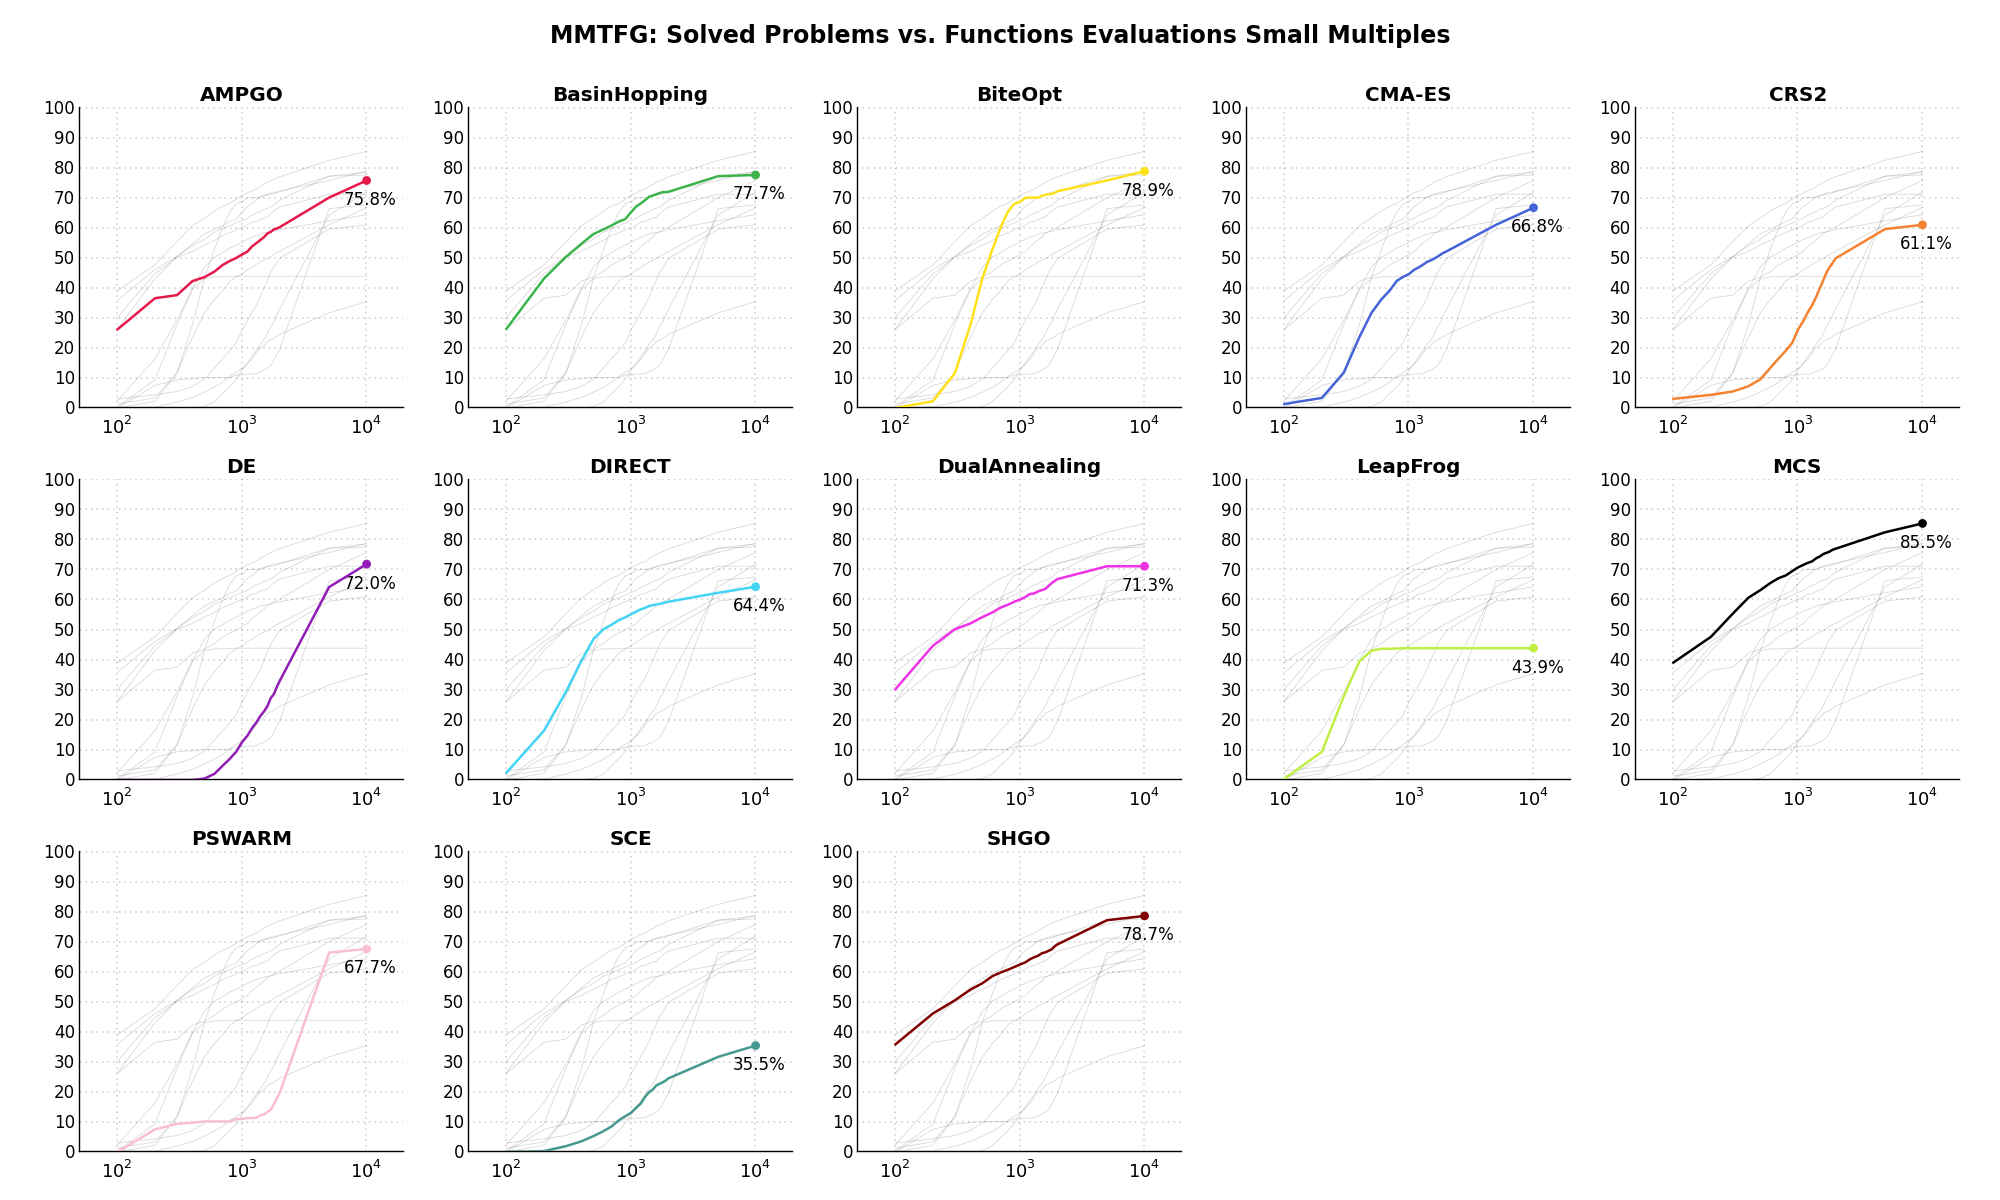 Percentage of problems solved given a fixed number of function evaluations on the MMTFG test suite